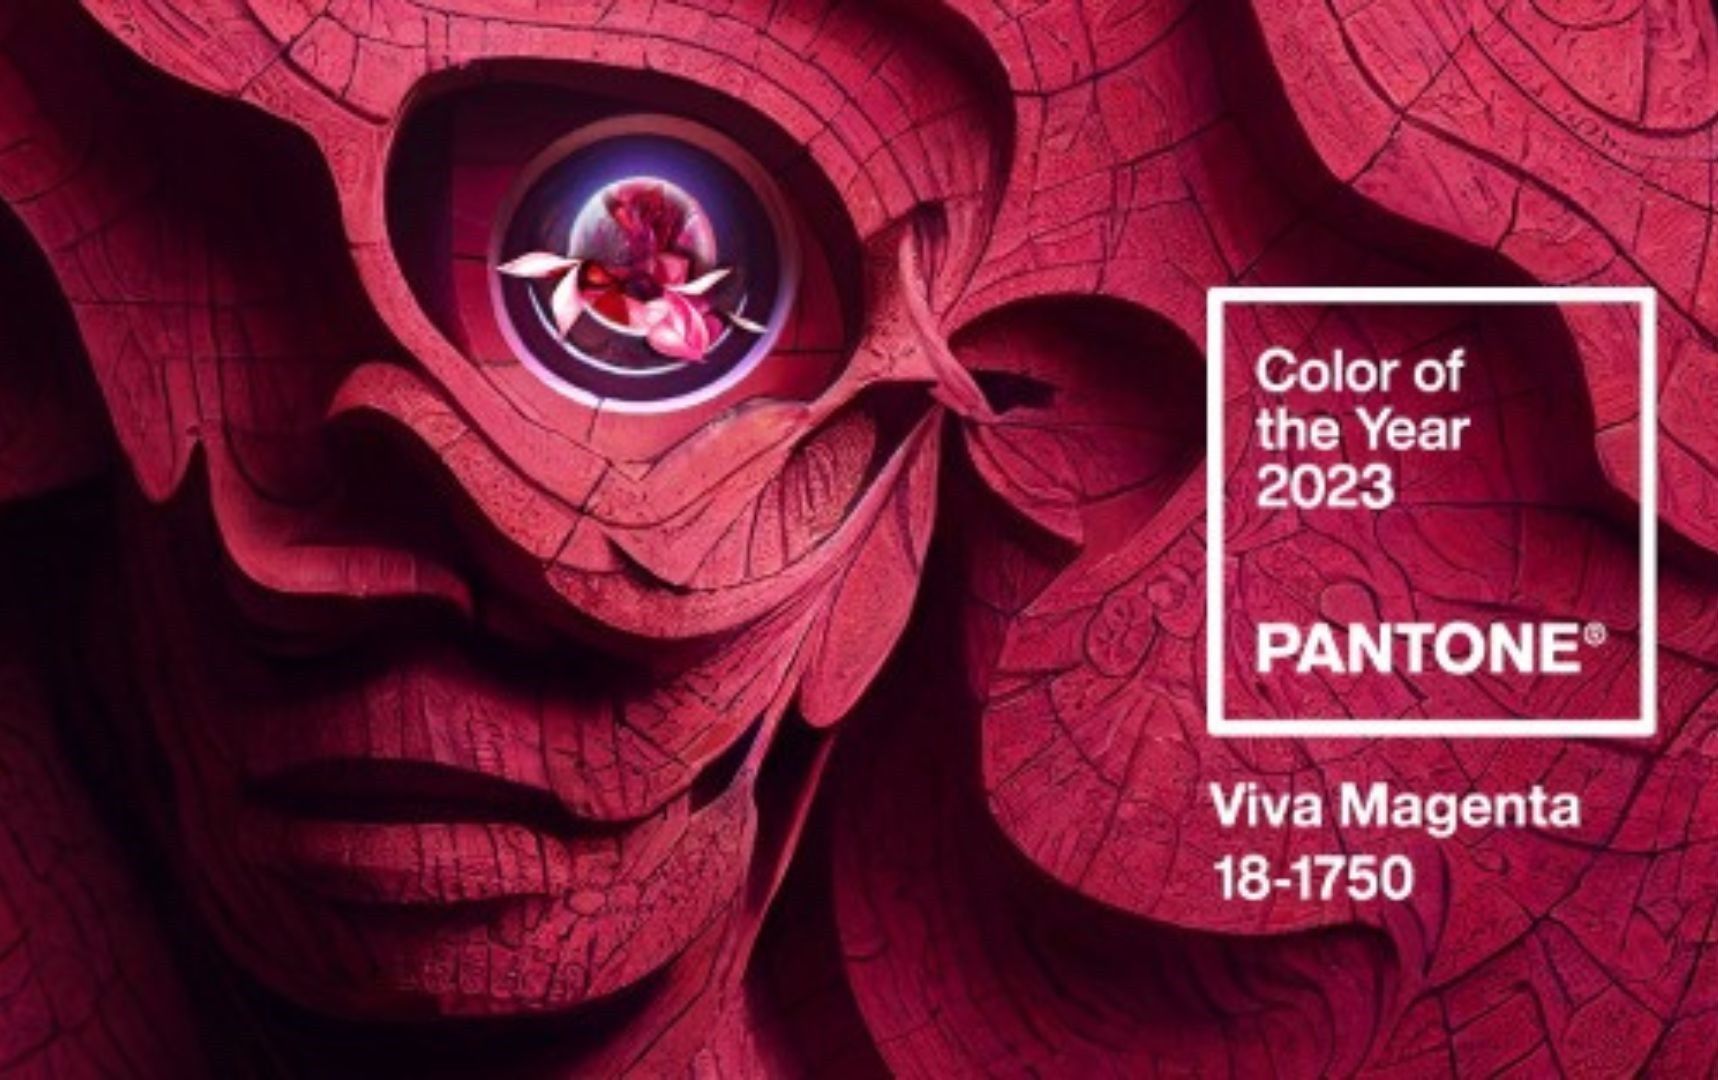 Viva Magenta is the 2023 Pantone Color of the Year